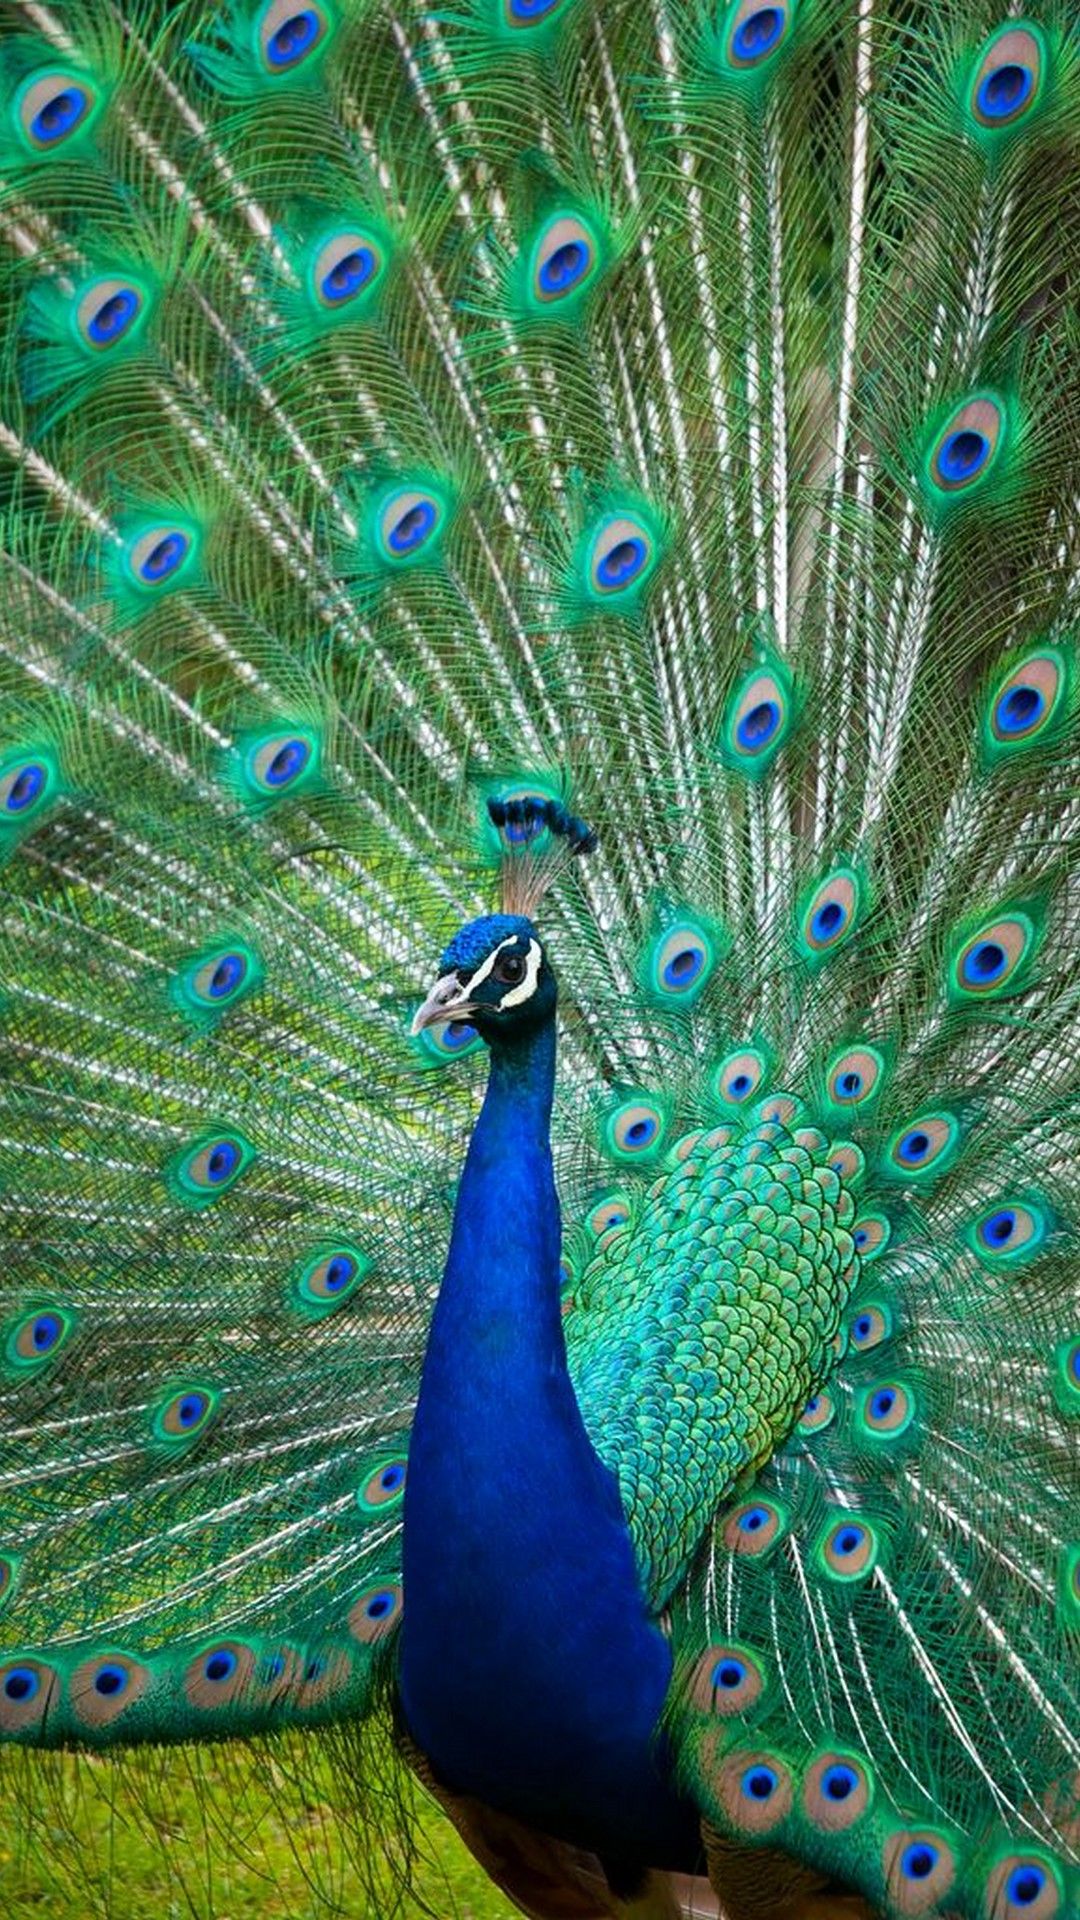 Peacock Iphone Wallpaper - KoLPaPer - Awesome Free HD Wallpapers